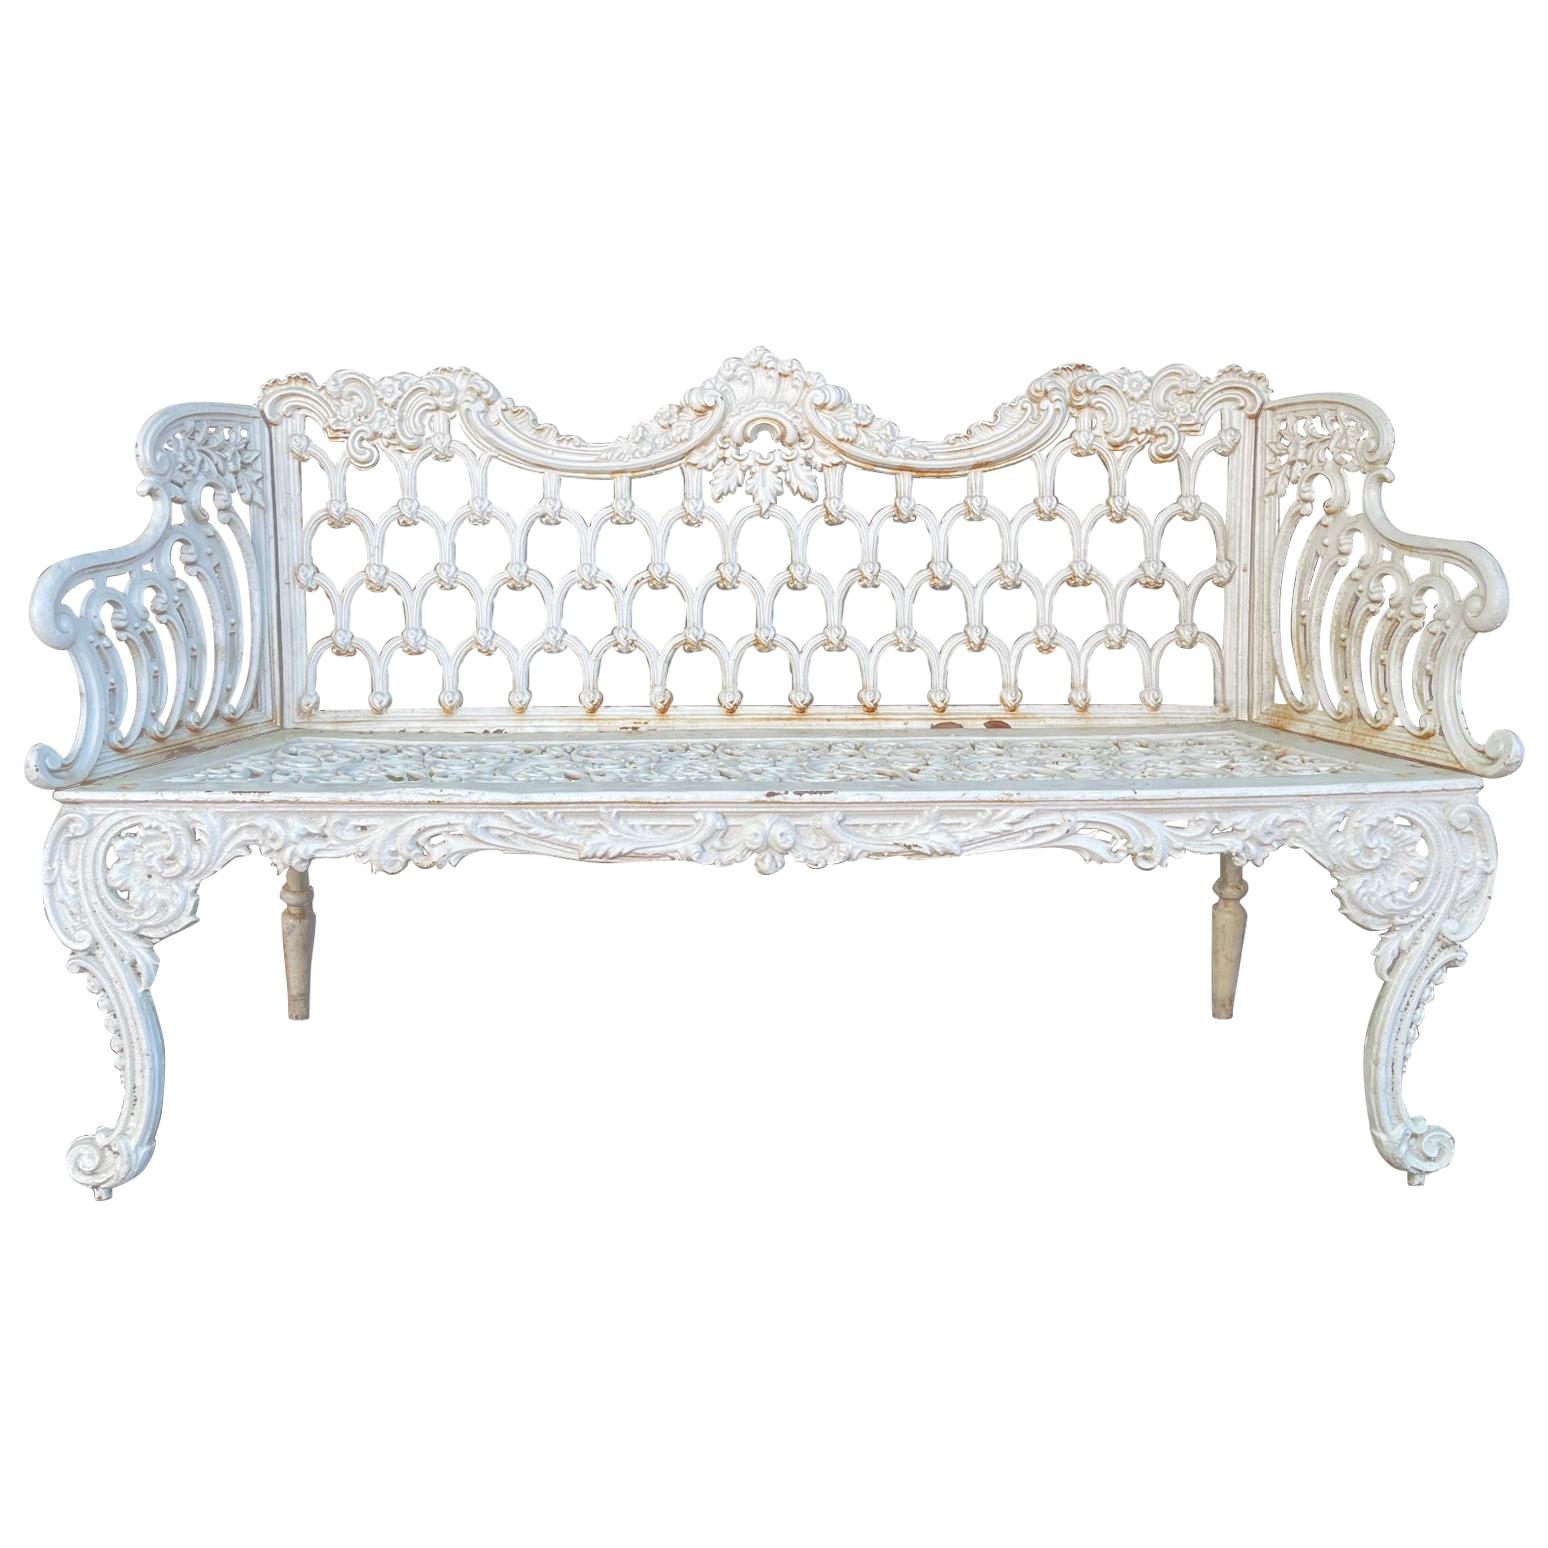 Scottish Victorian Painted Cast Iron Bench with Scroll Design, Circa 1846